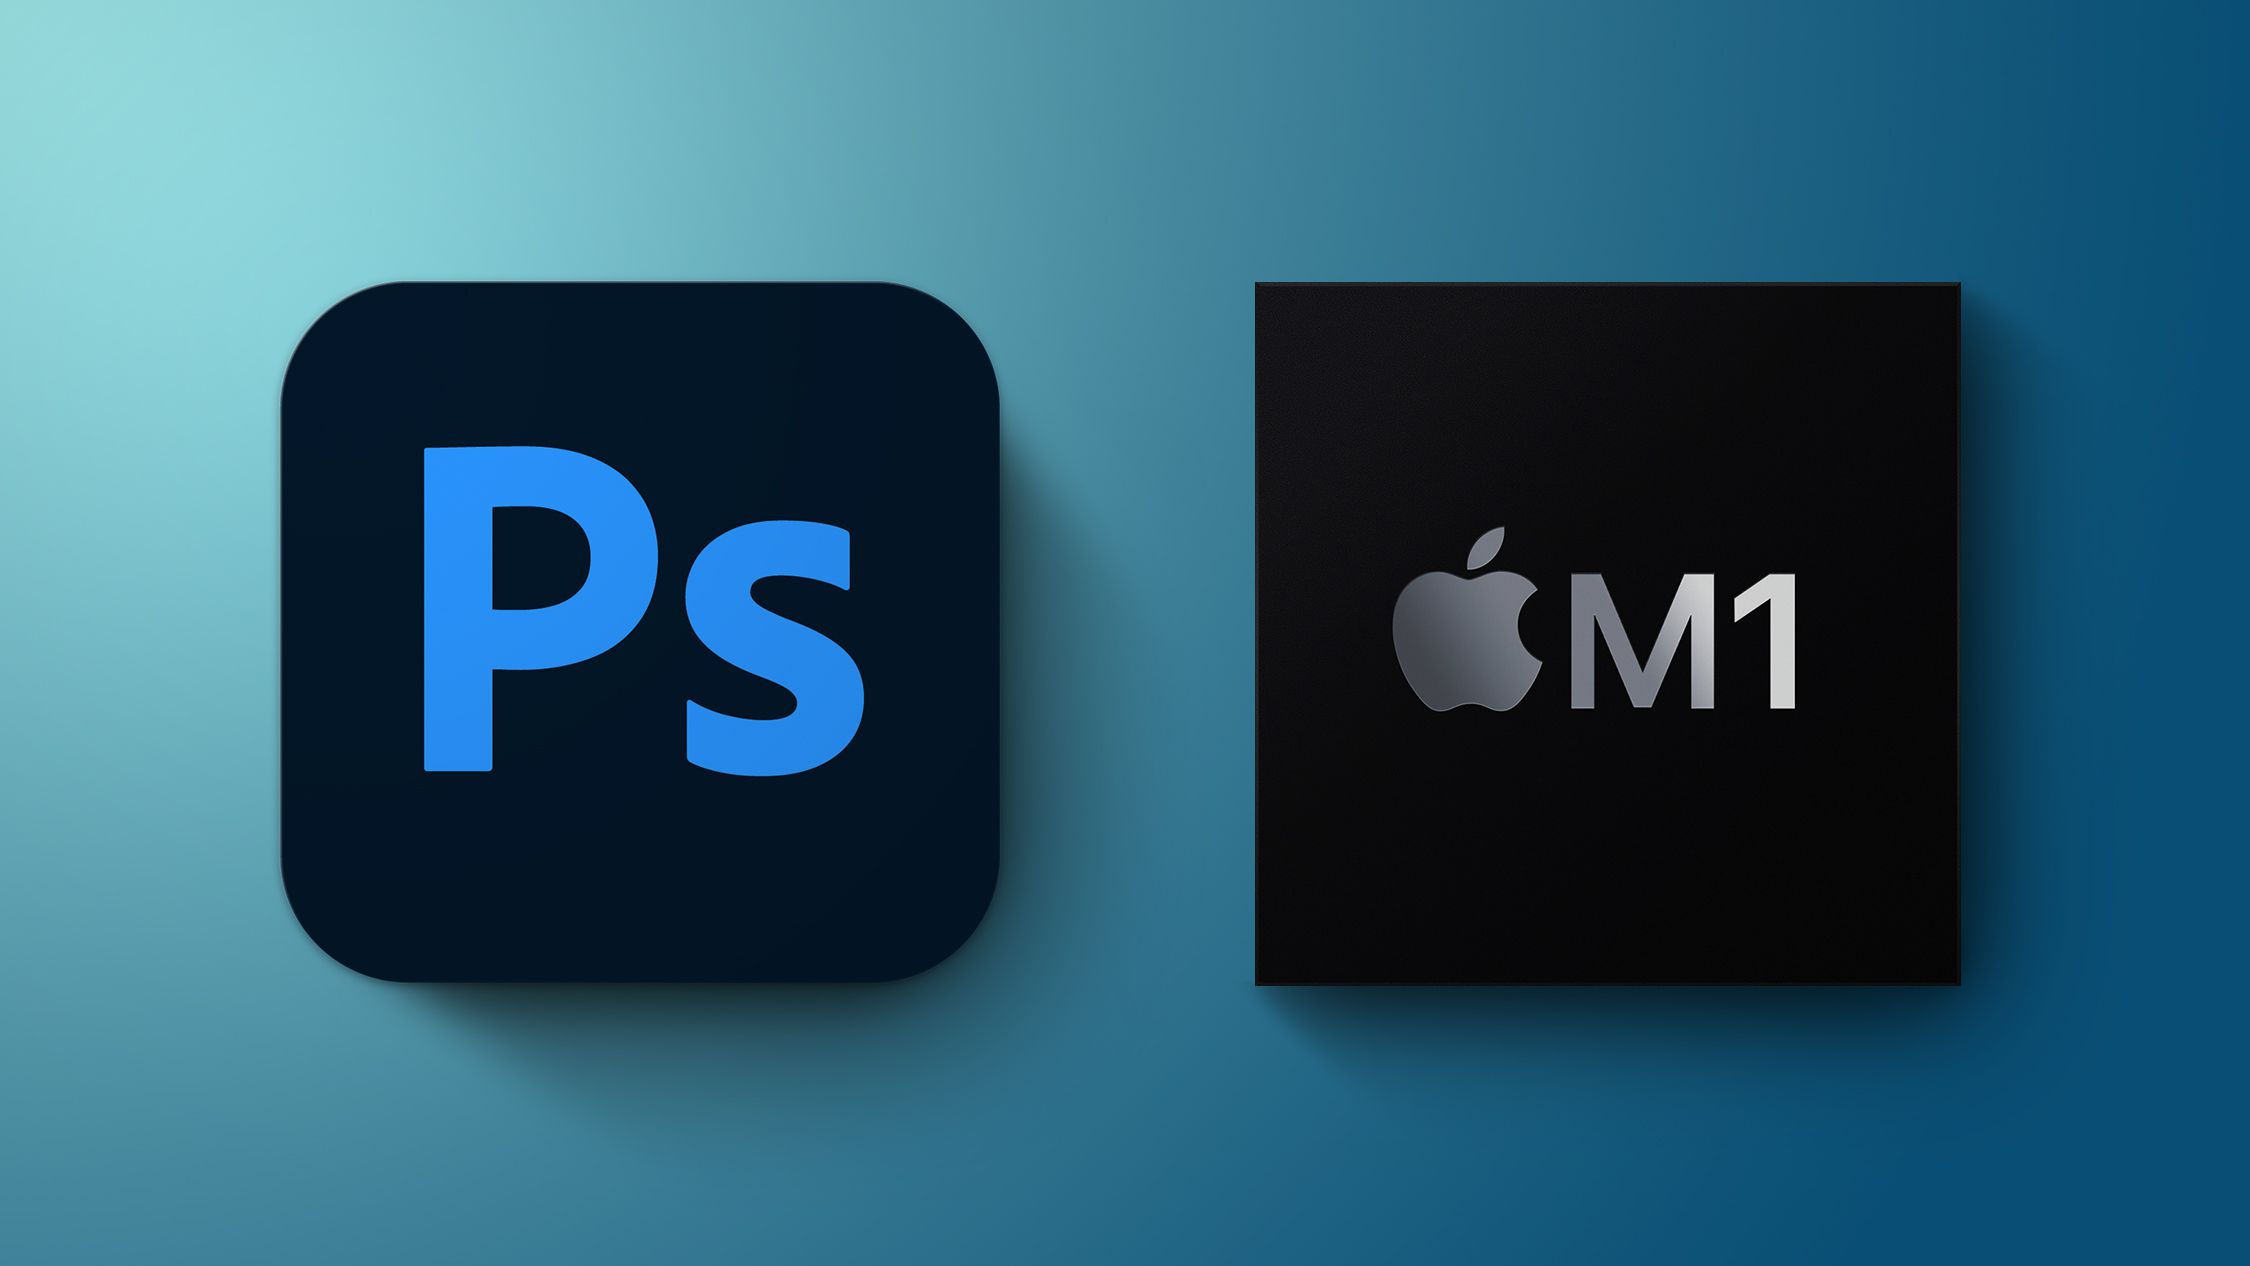 Adobe says Photoshop on M1 runs 50% faster than Intel-based MacBook in 2019